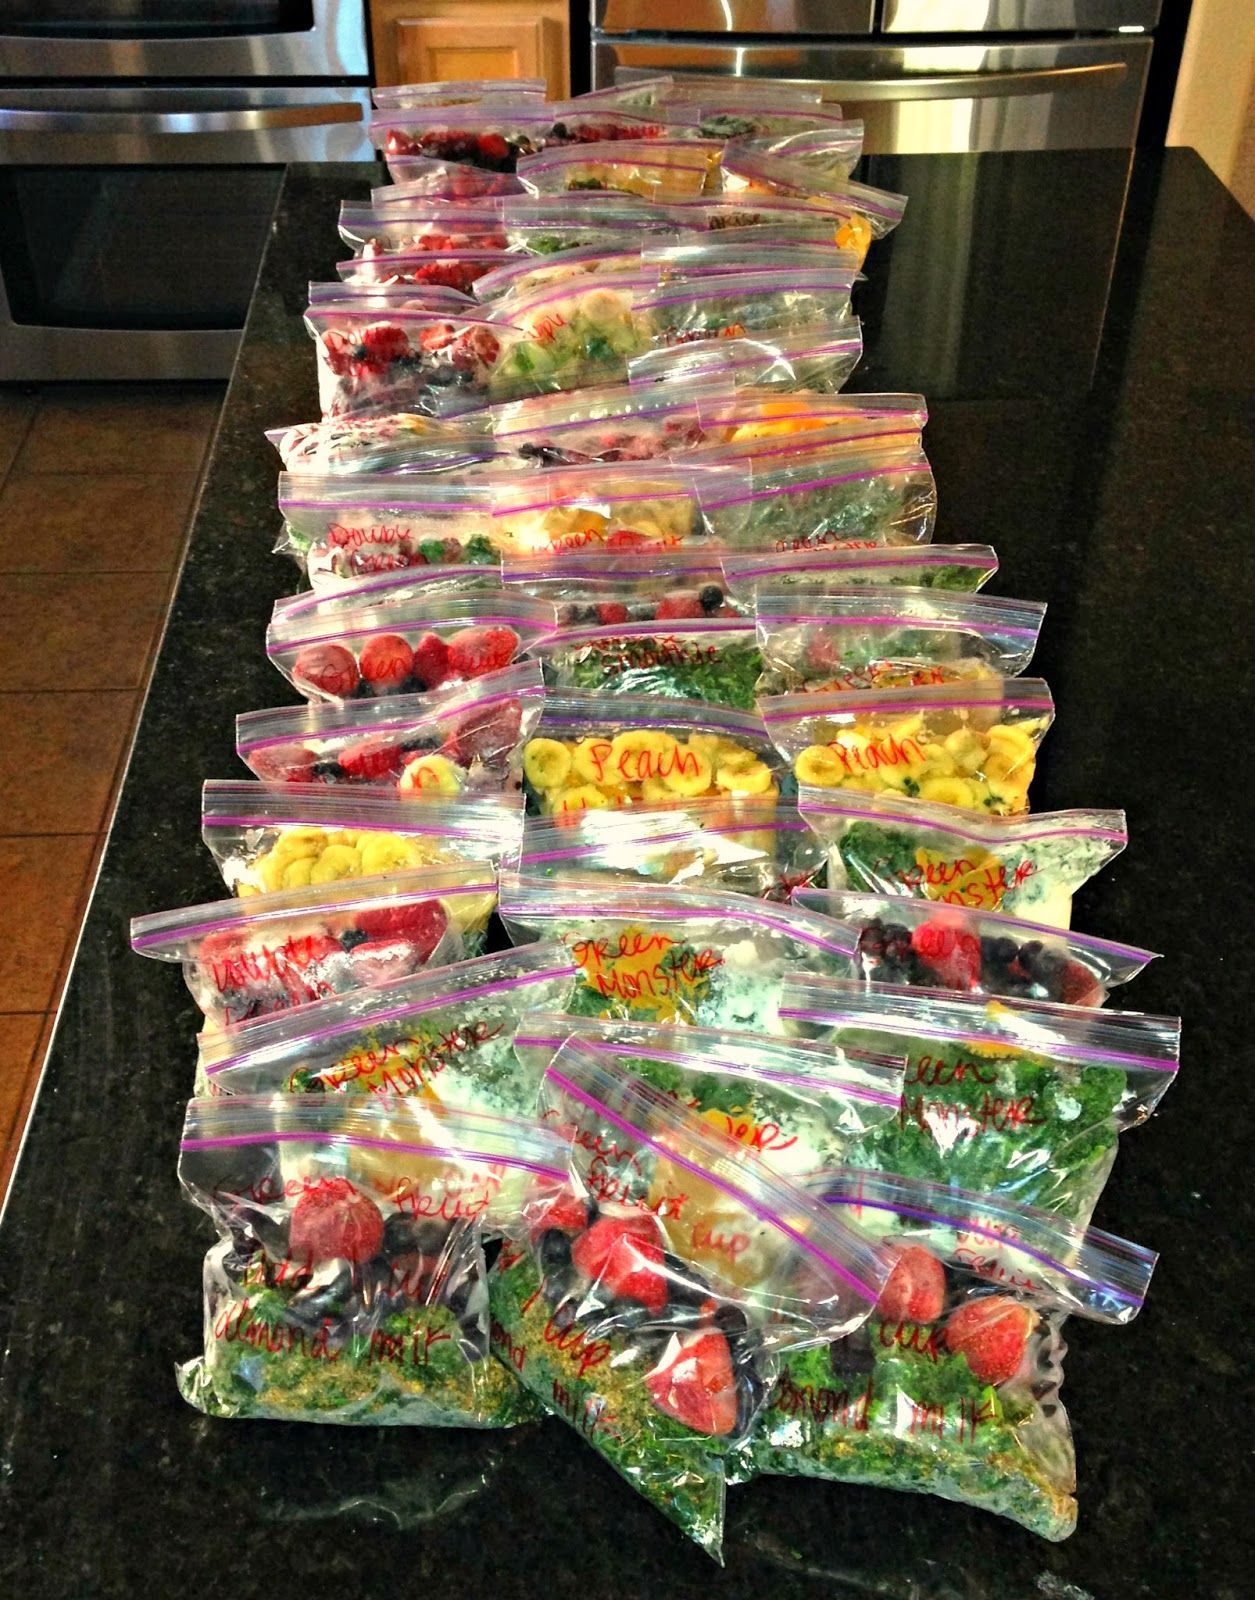 Frozen Smoothie Packs – Must try this to save time and save all those fruits and veggies that go bad when I don’t make that